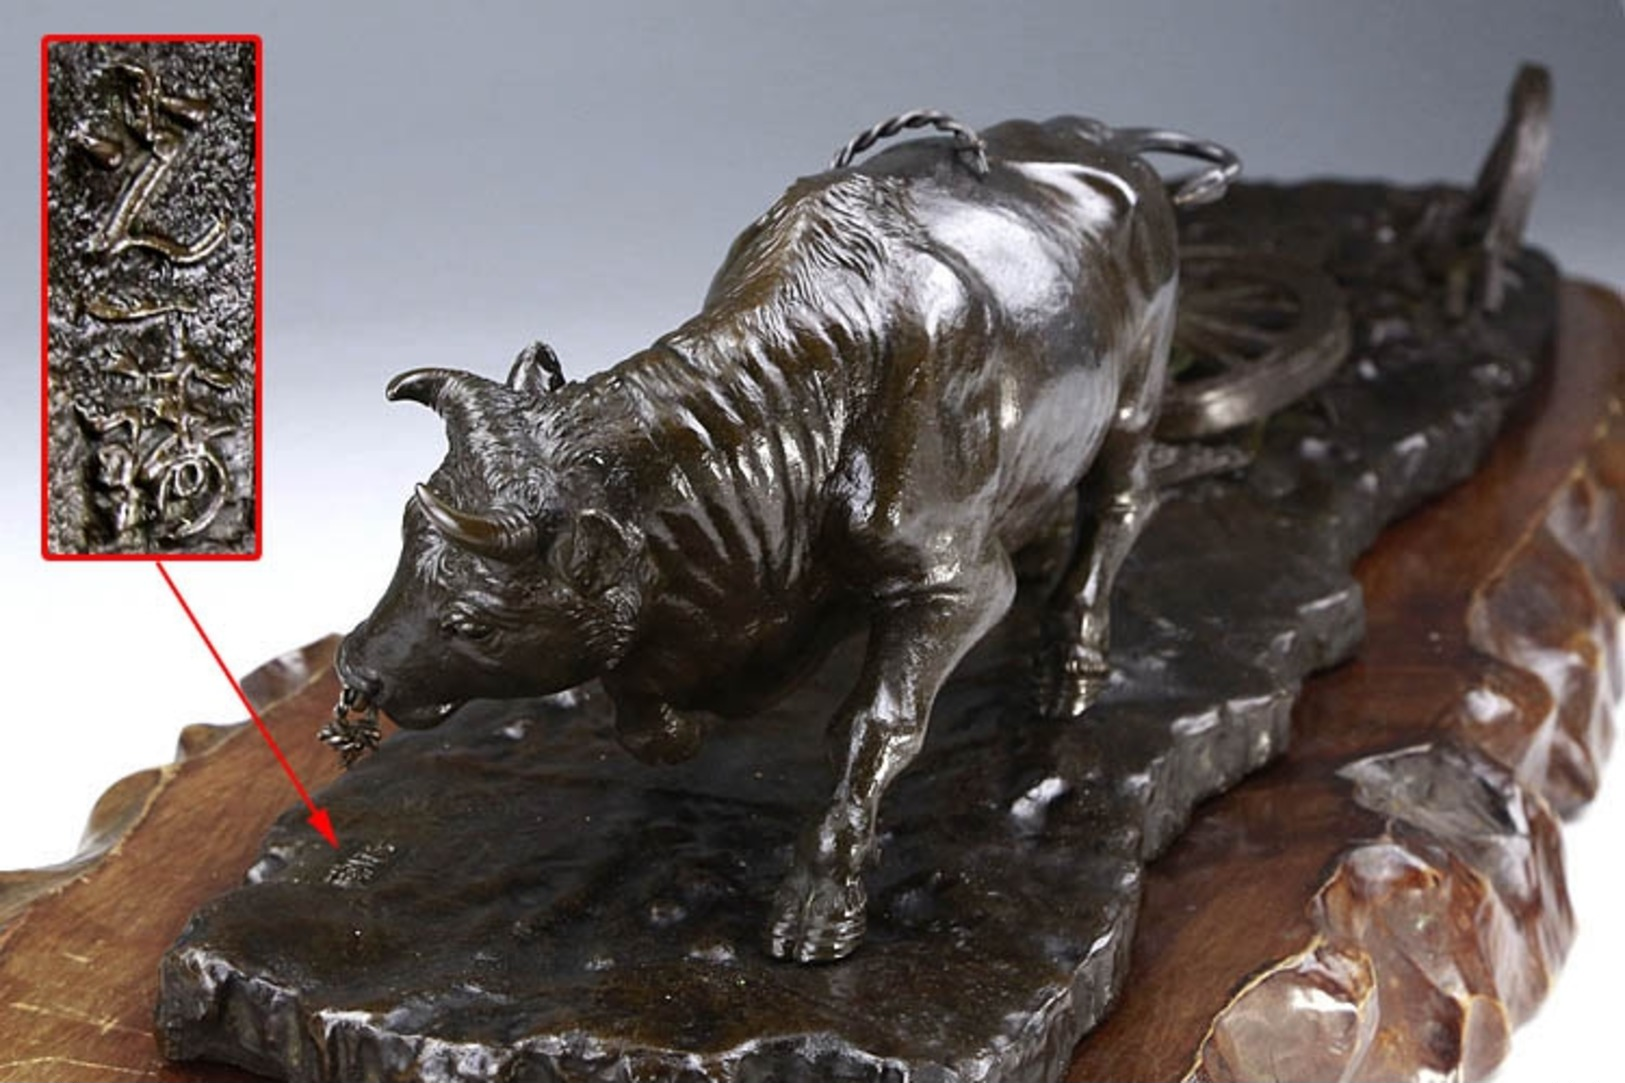 Japan's Meiji Period (1868-1912) Pure Copper Sculpture Ornaments / Angry Cattle - Bronzi